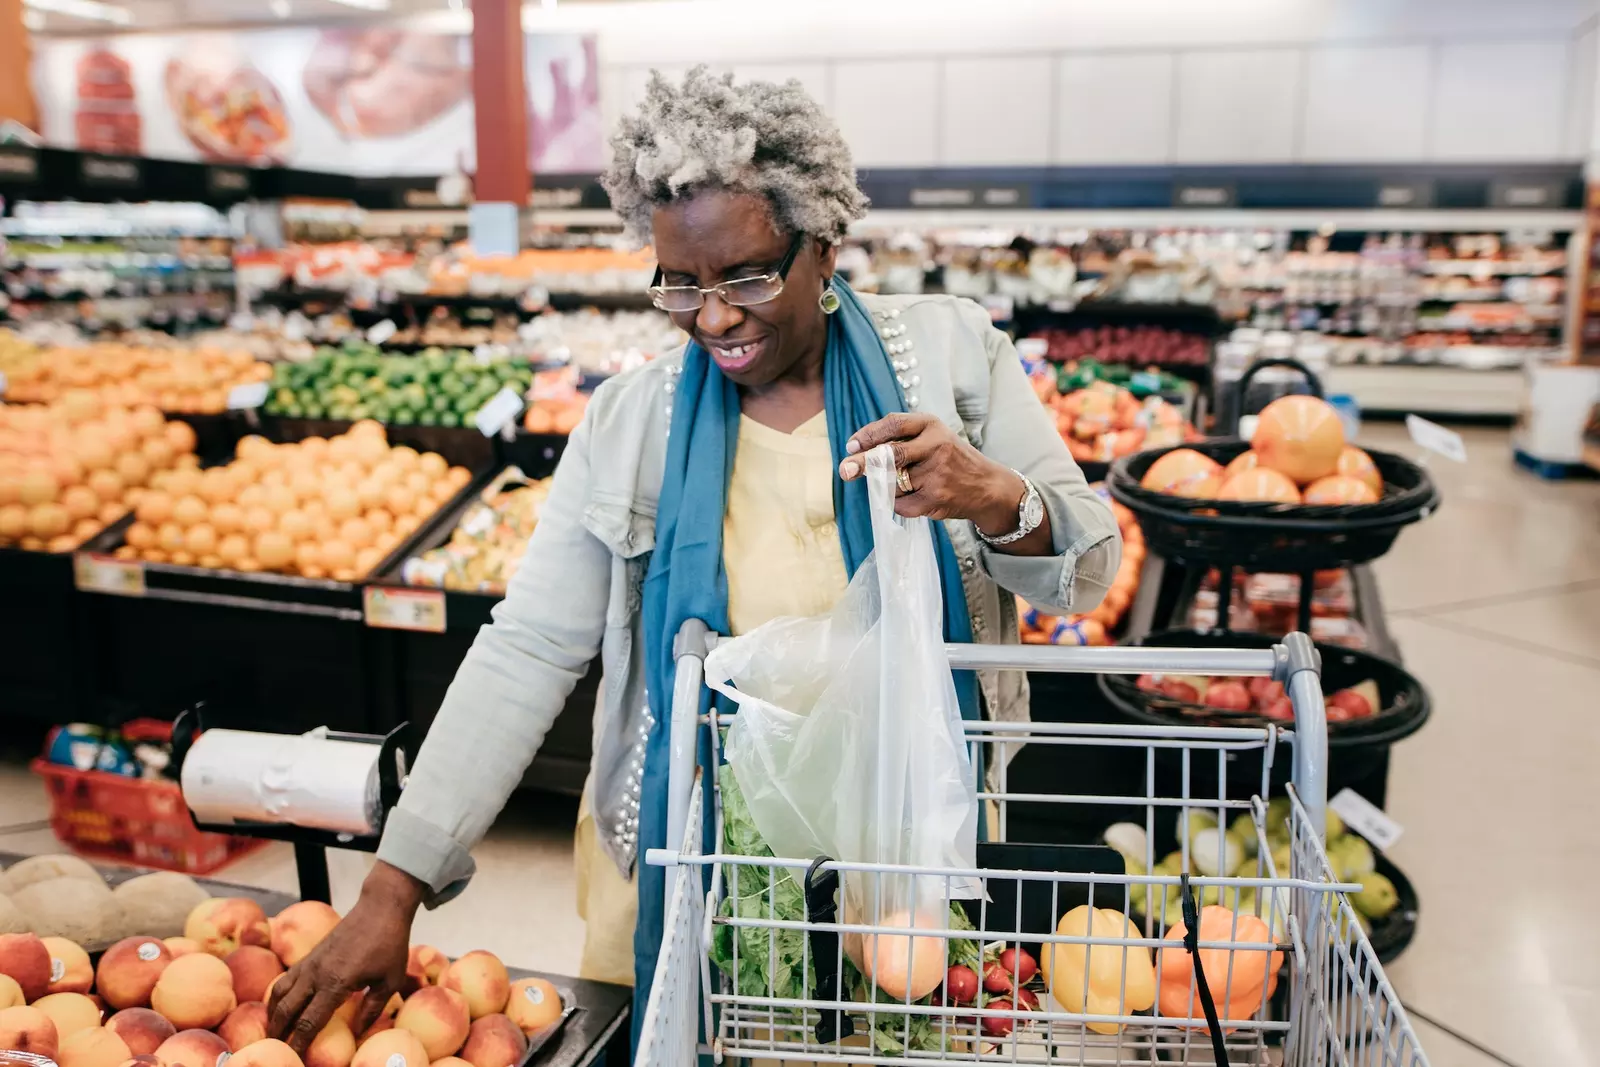 Older woman shopping for produce at the grocery store